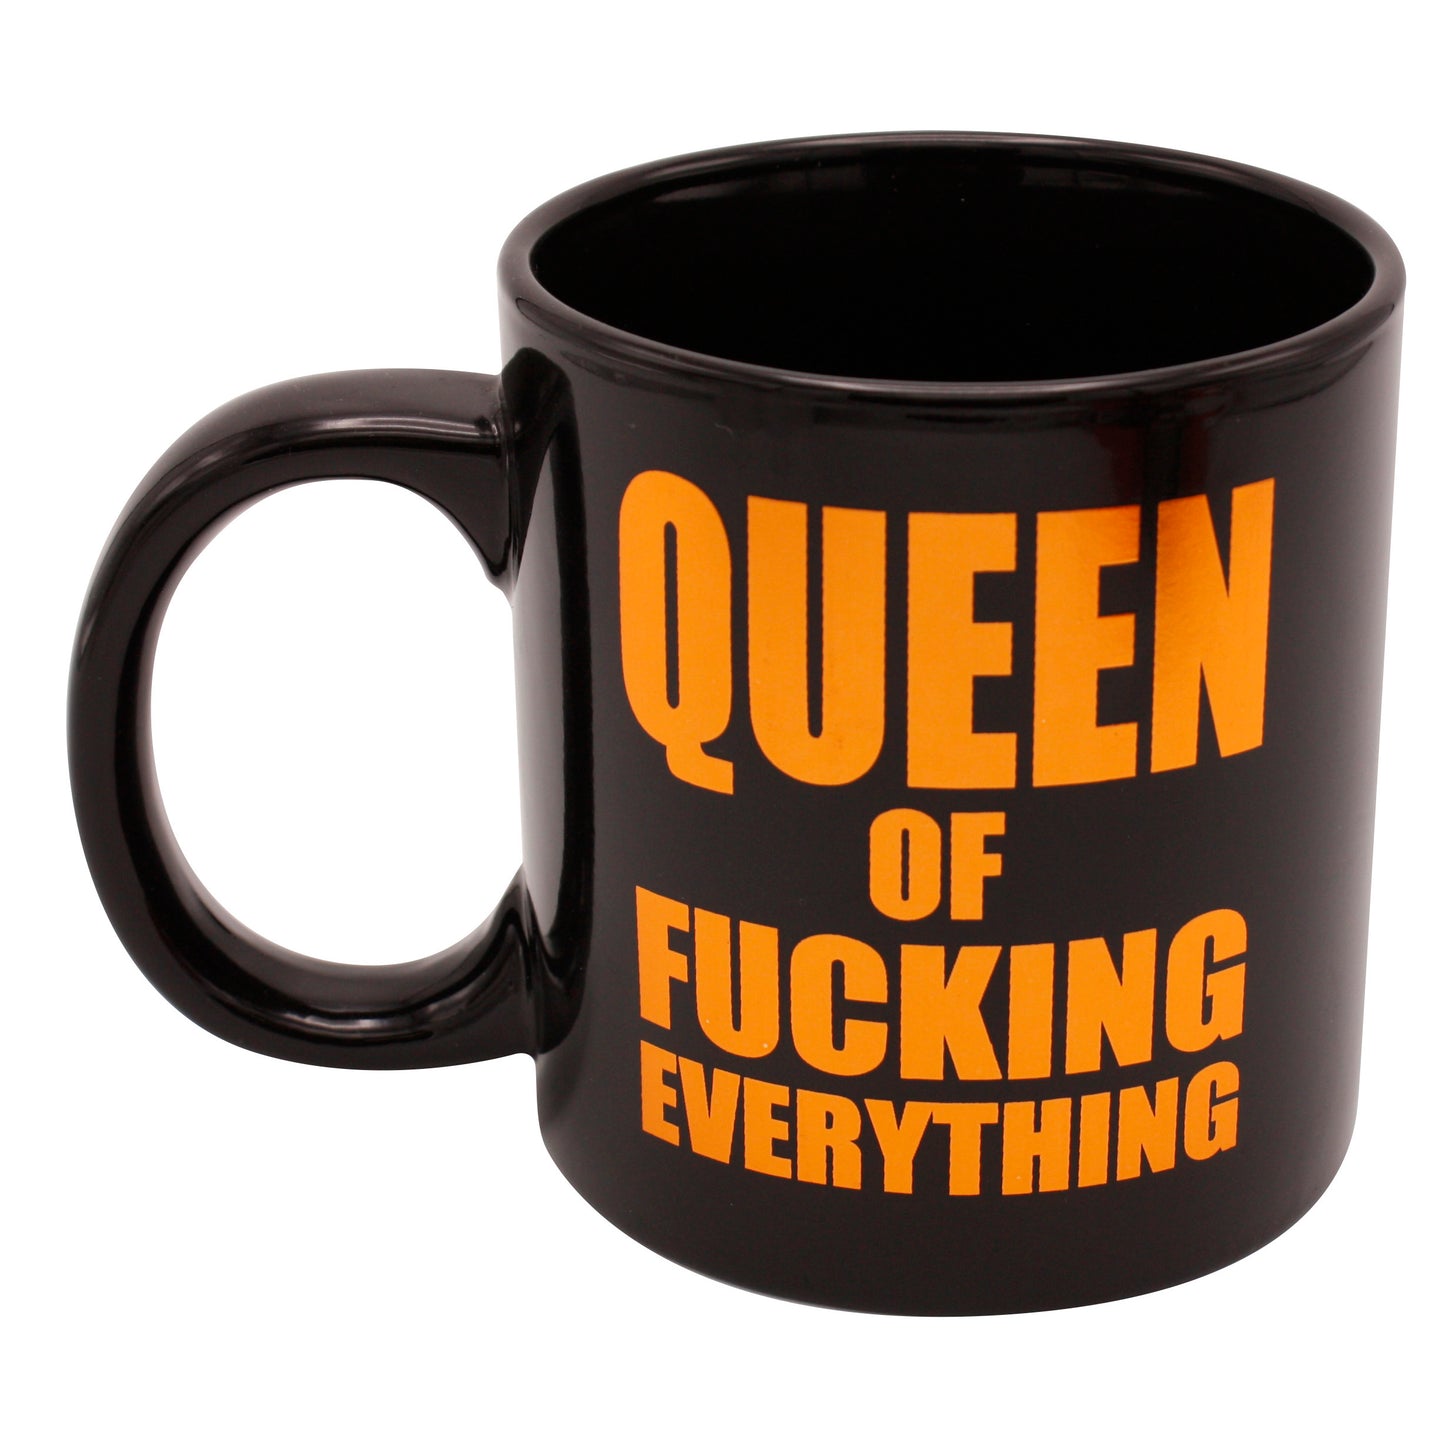 Giant Queen of Fucking Everything Foil Mug